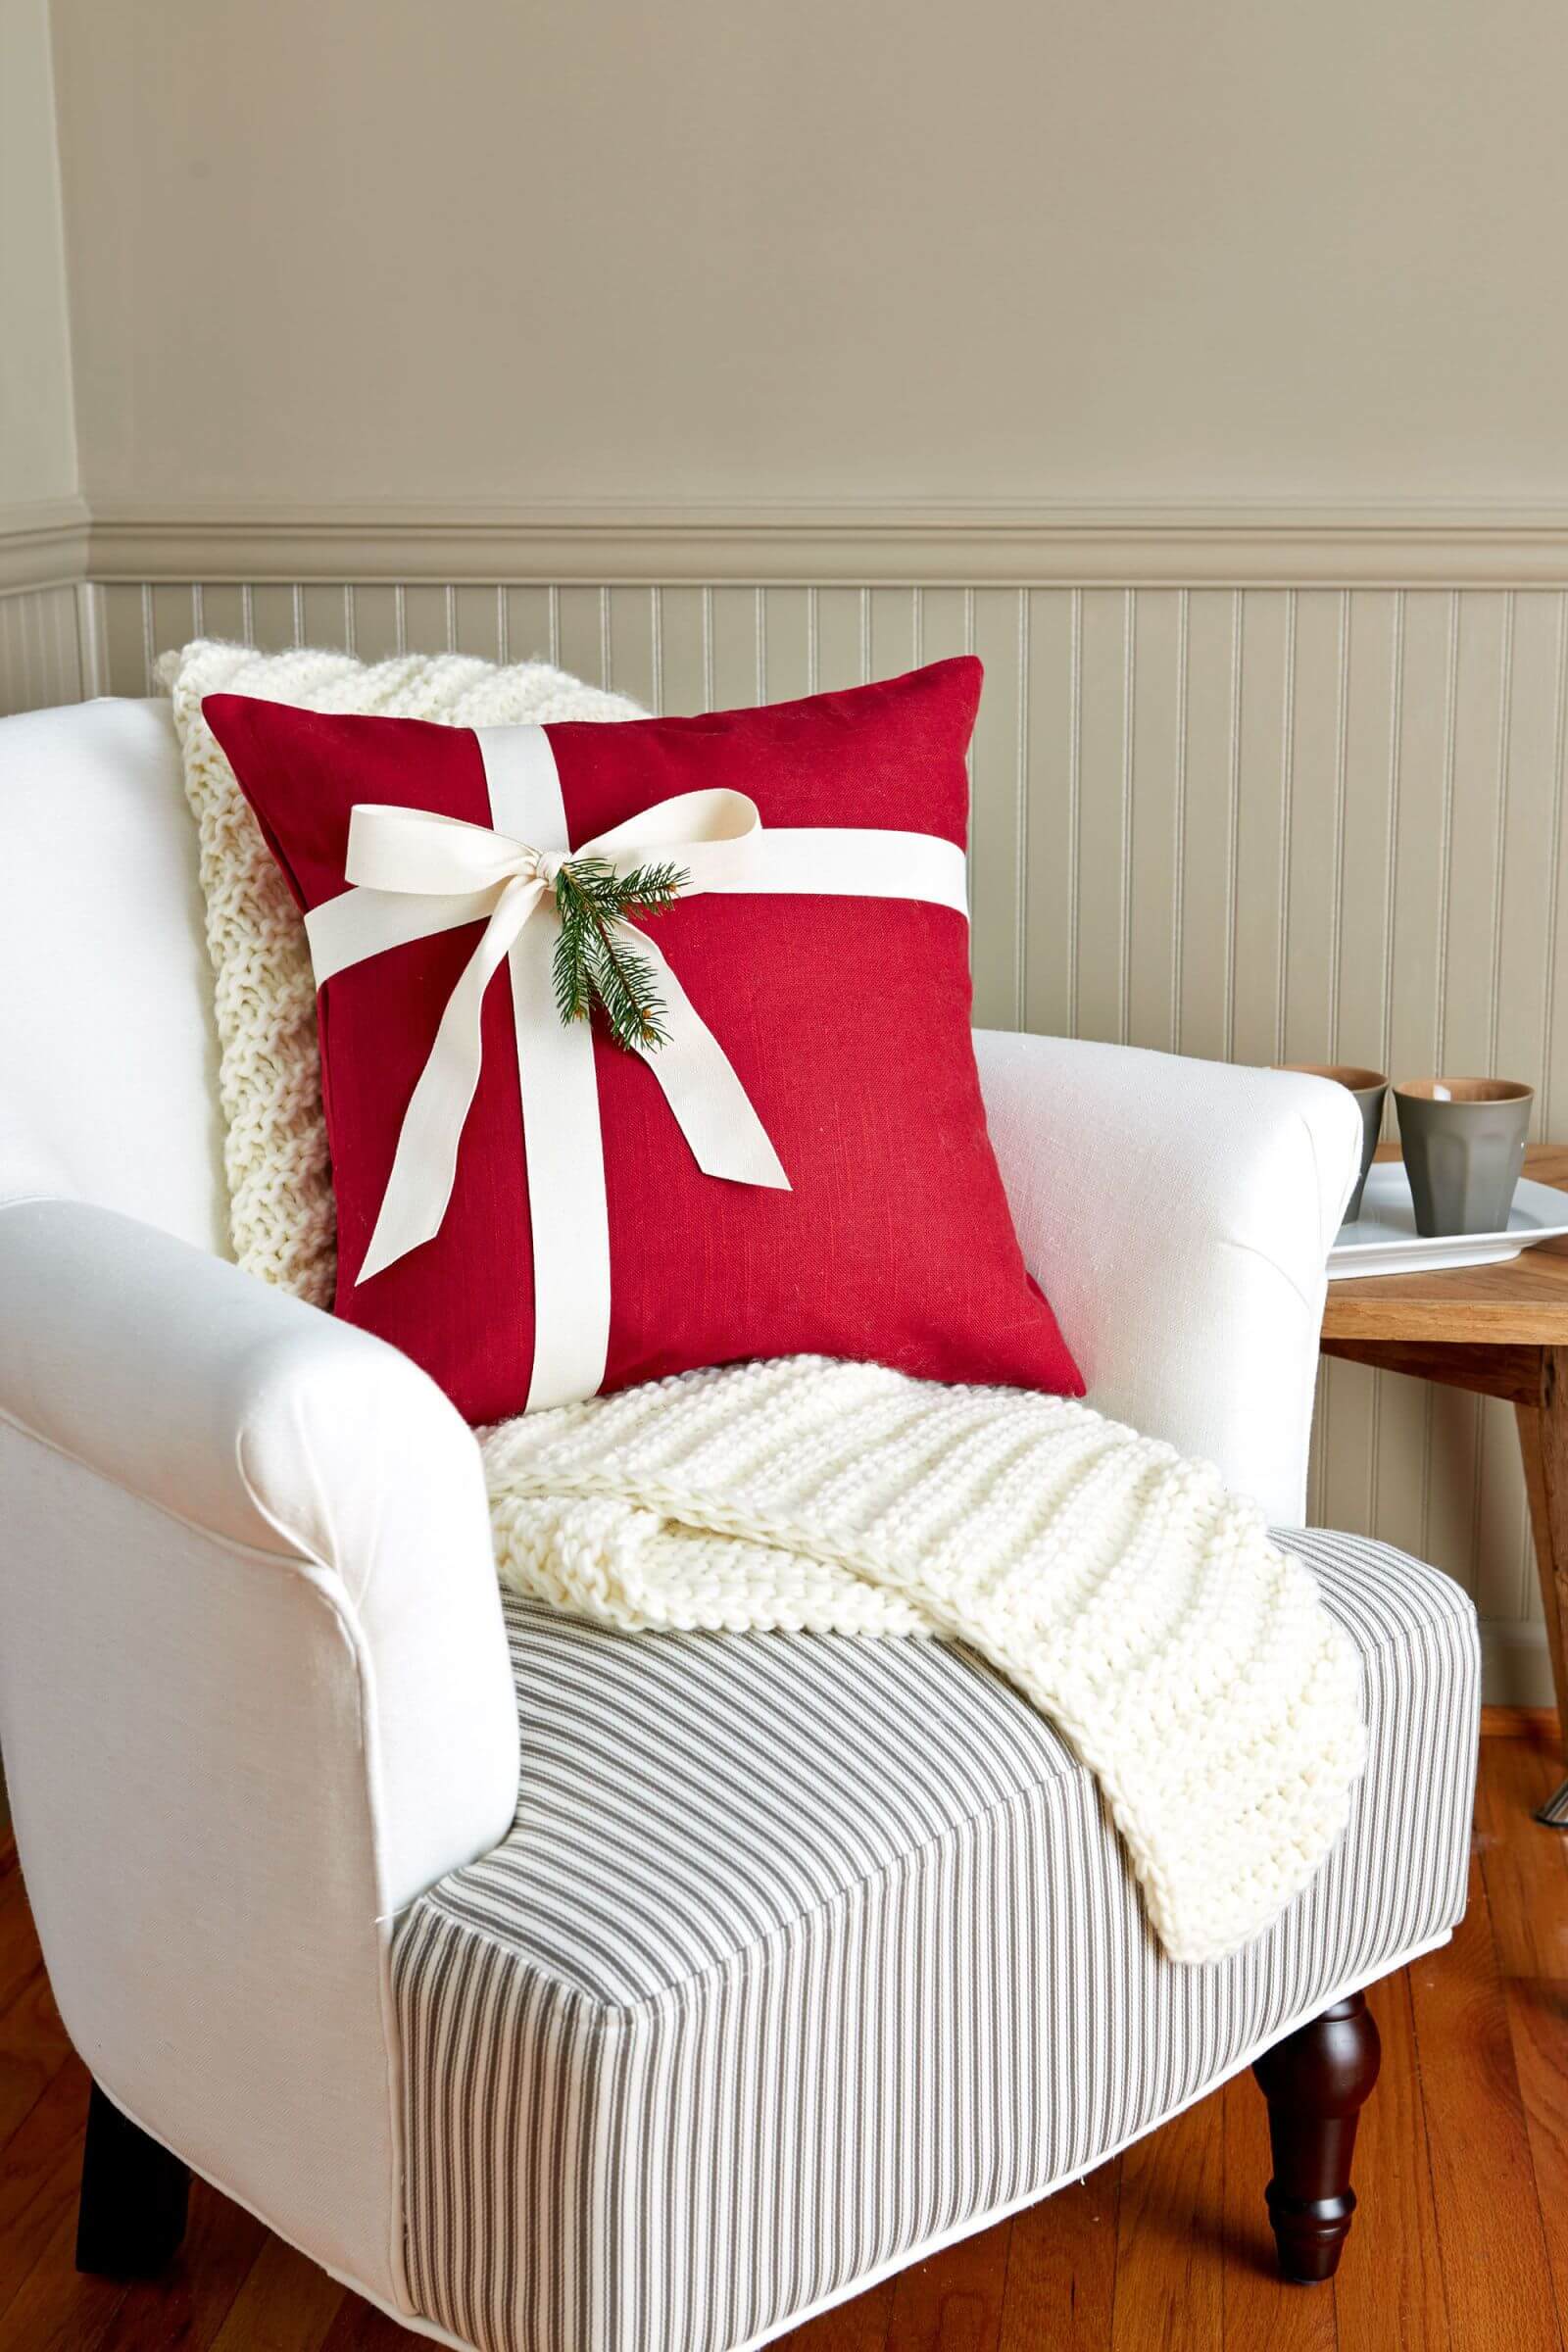 A white chair with a red pillow on it
